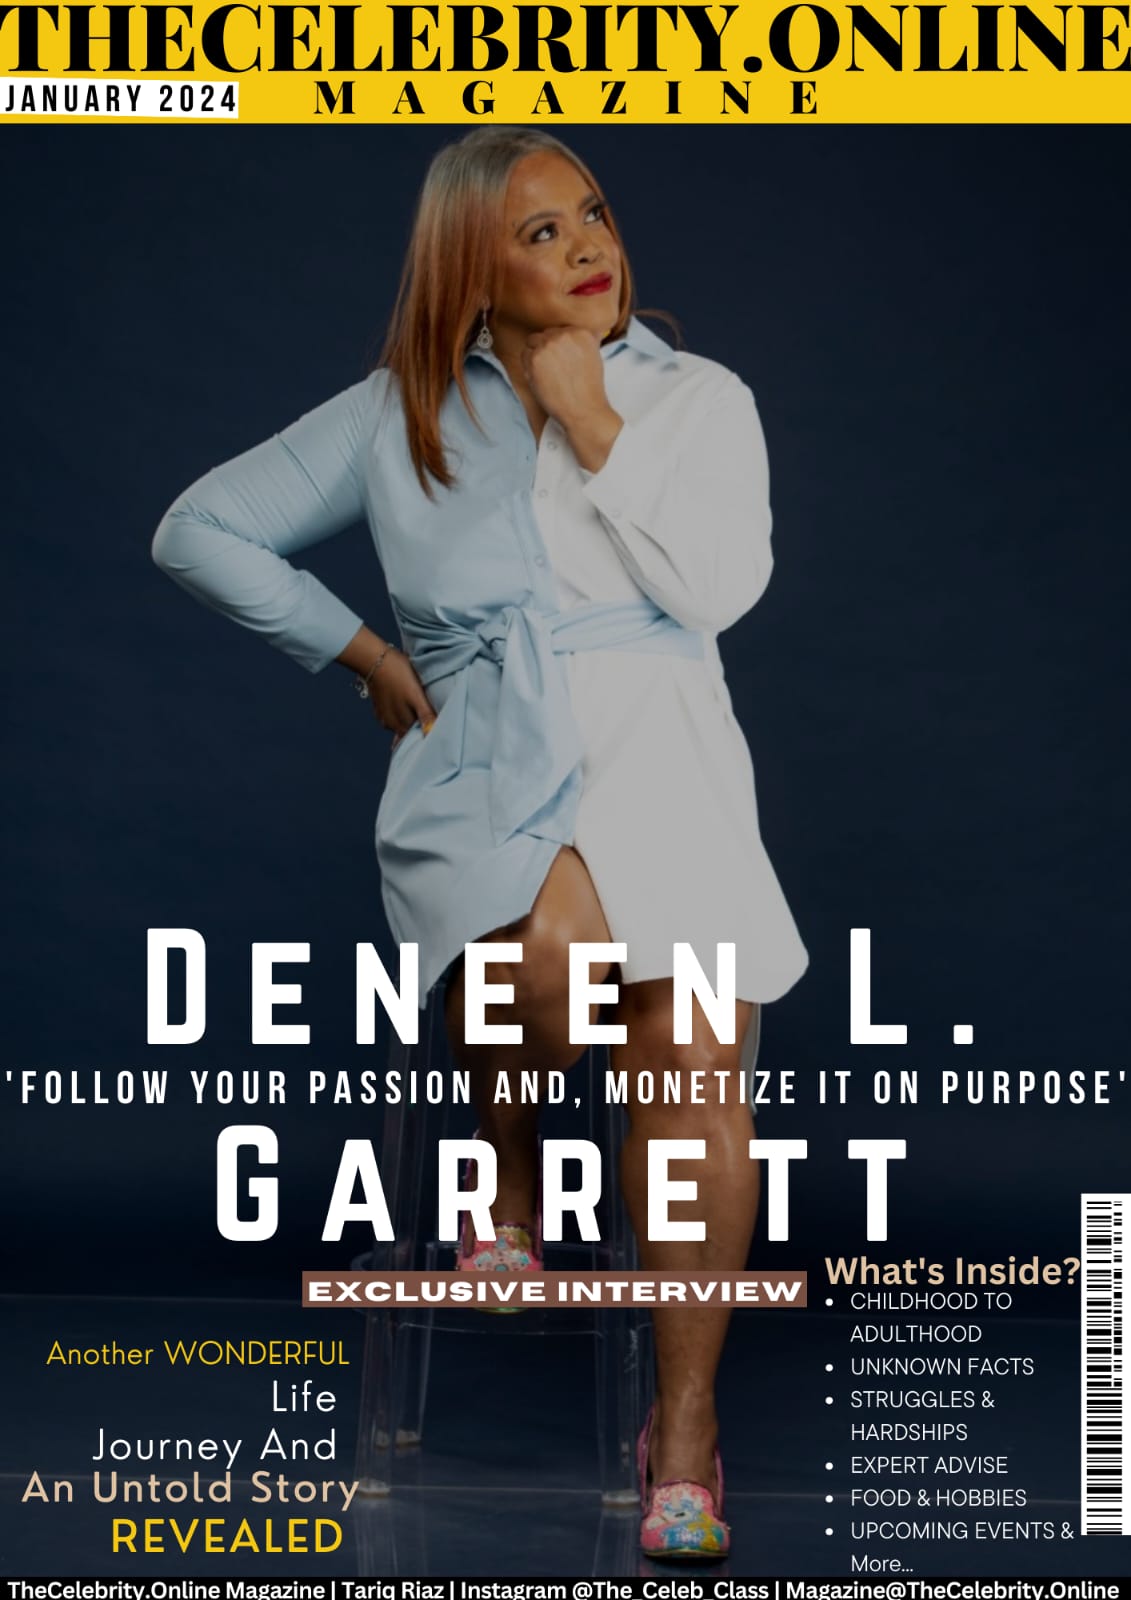 Deneen L. Garrett Exclusive Interview – ‘Follow Your Passion And, Monetize It On Purpose’